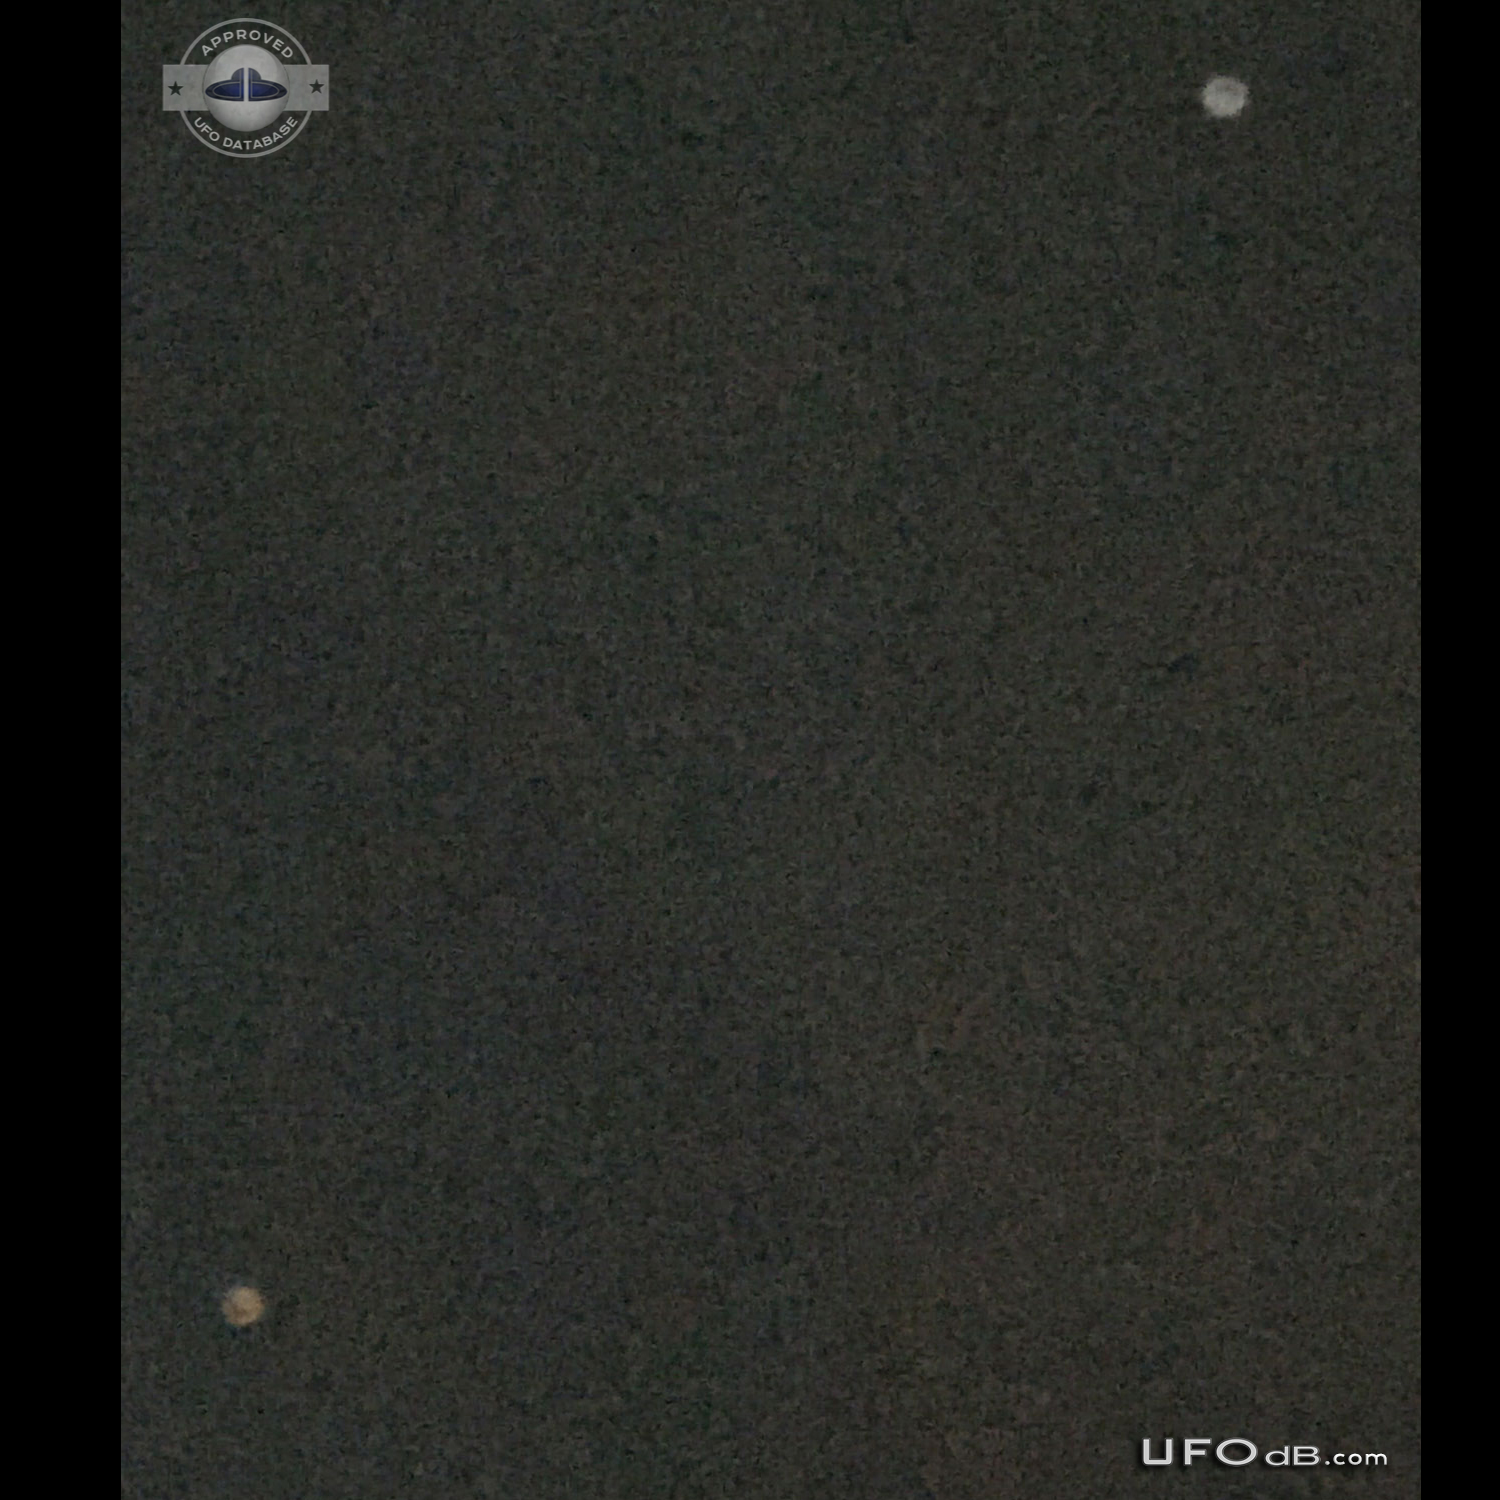 Many hovering UFOs with planes flying around them Weatherford, Texas UFO Picture #619-1